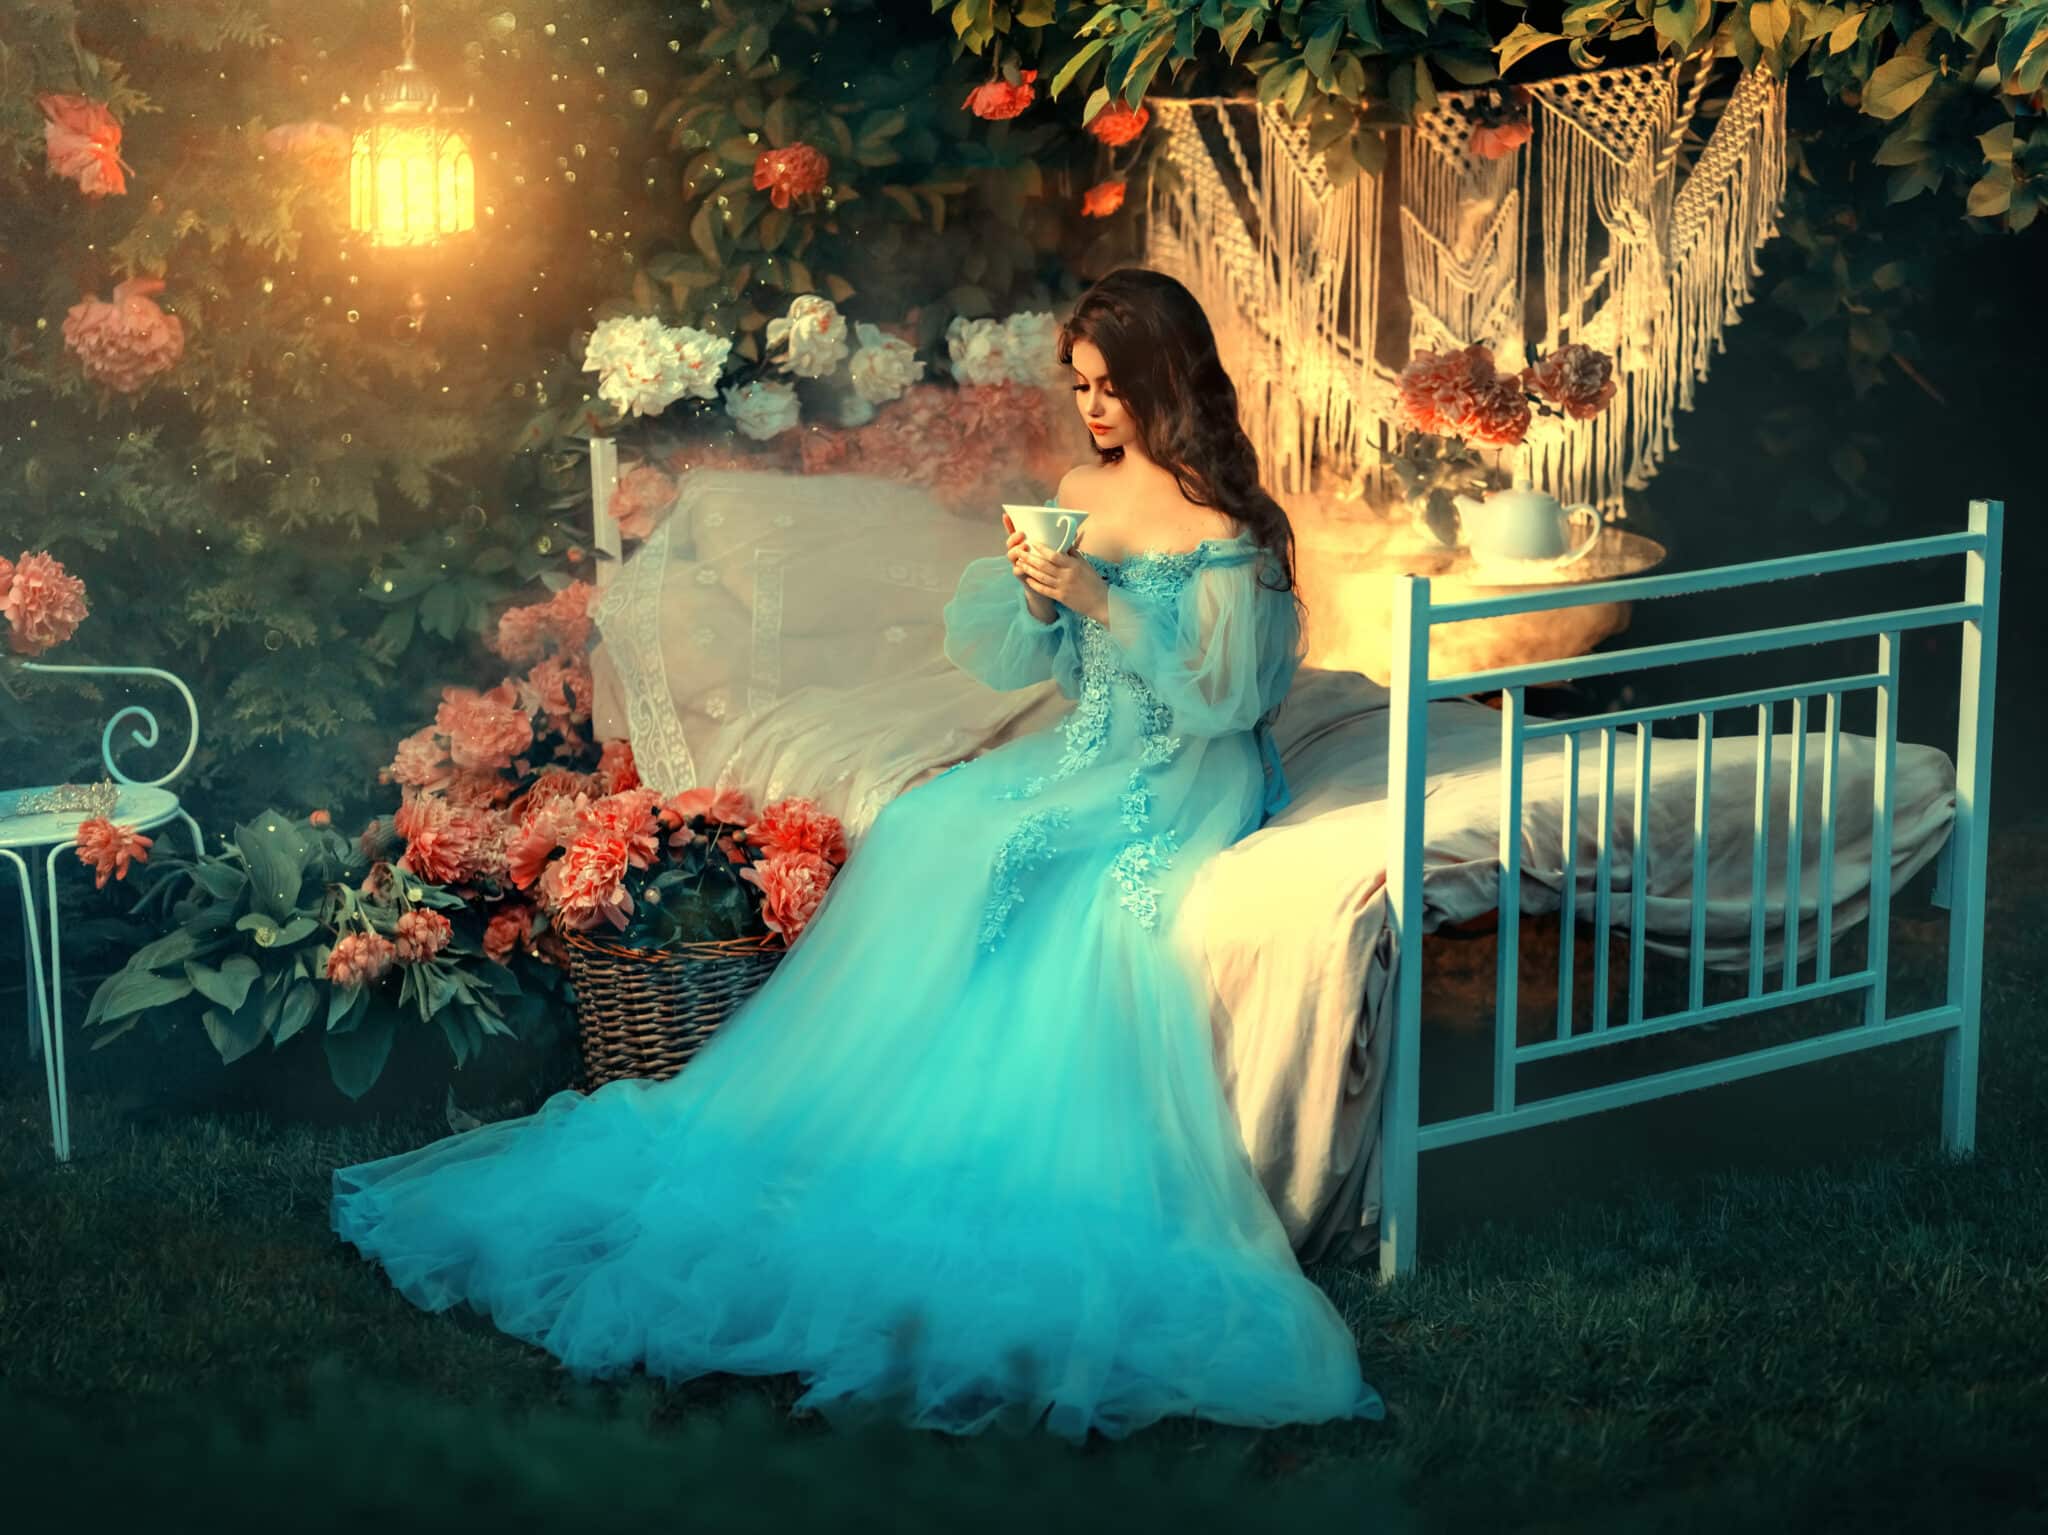 Fairy tale princess sits on white bed.